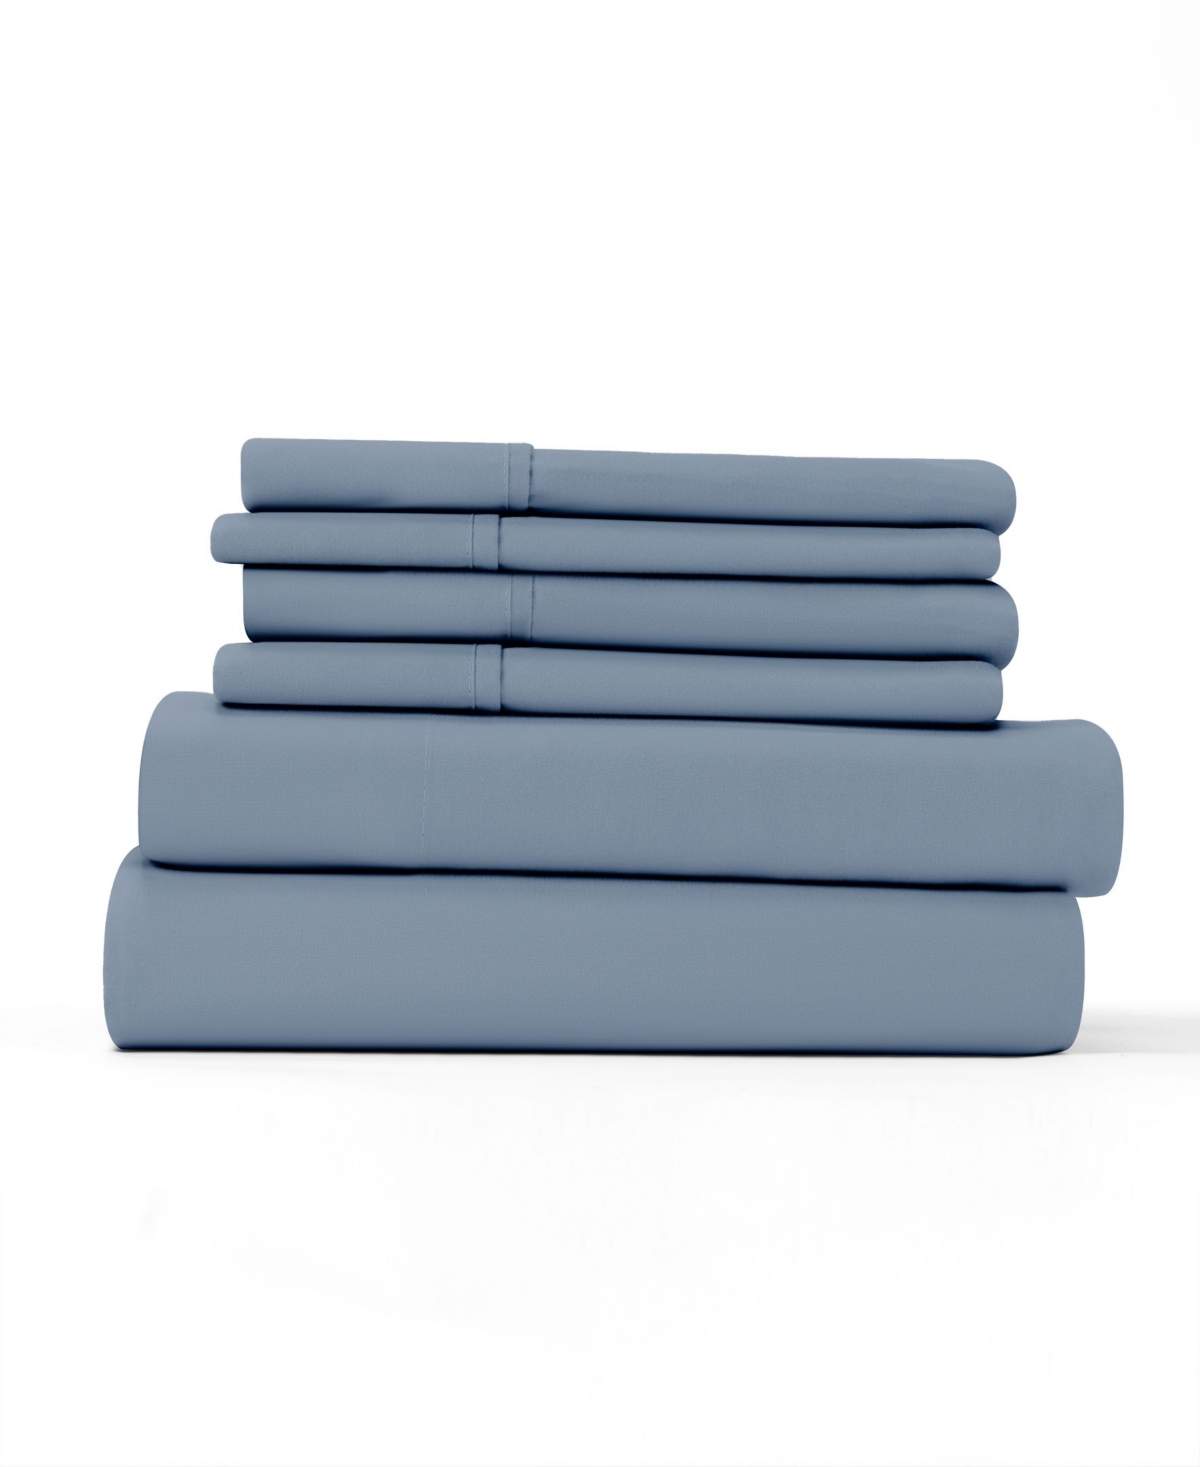 Ienjoy Home Solids In Style By The Home Collection 6 Piece Bed Sheet Set, Full Bedding In Stone